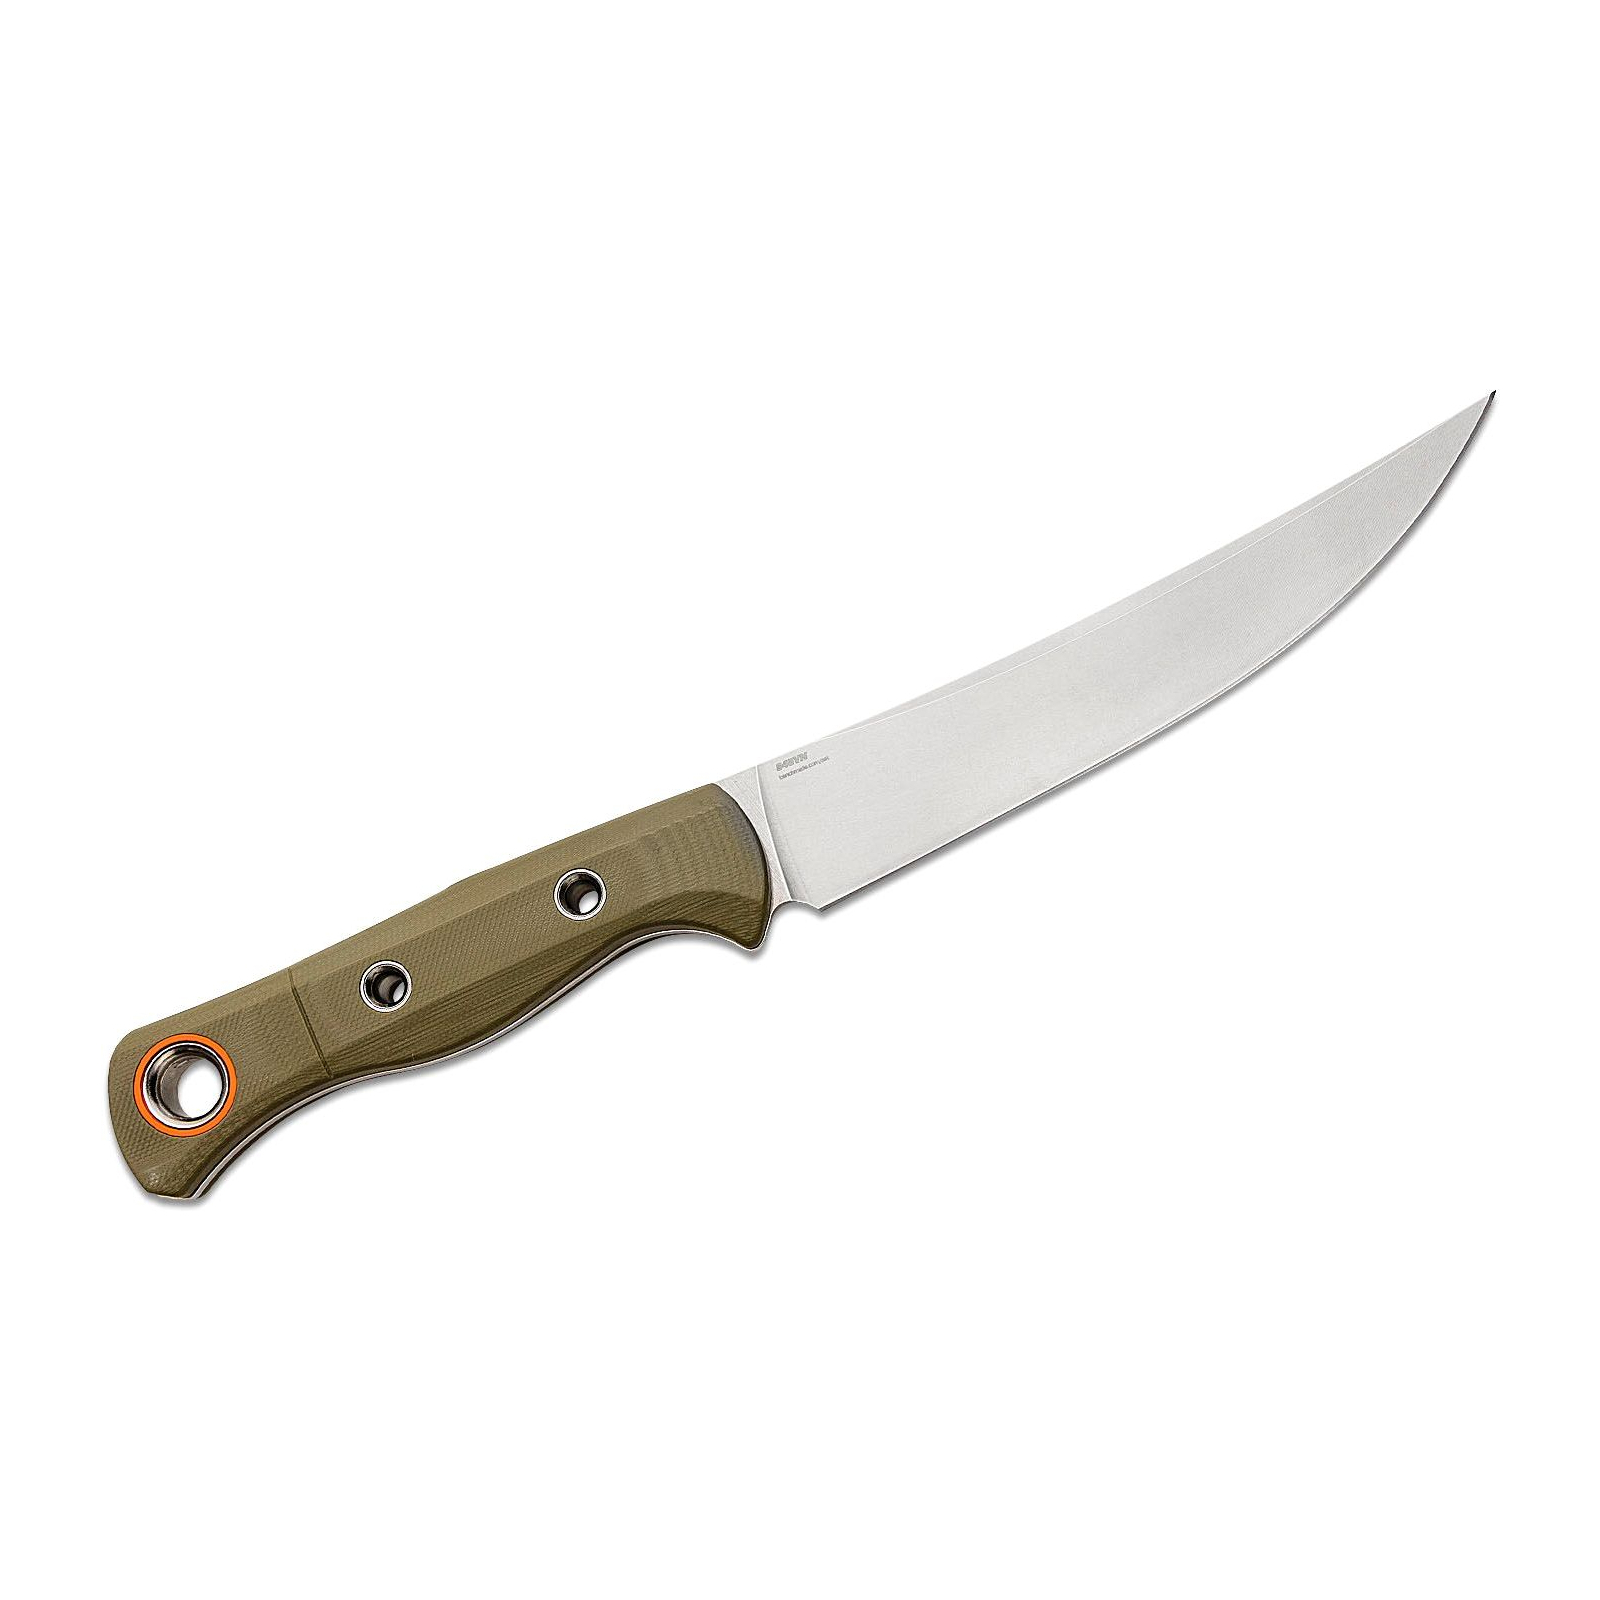 Нож Benchmade Meatcrafter Olive G10 (15500-3) изображение 2